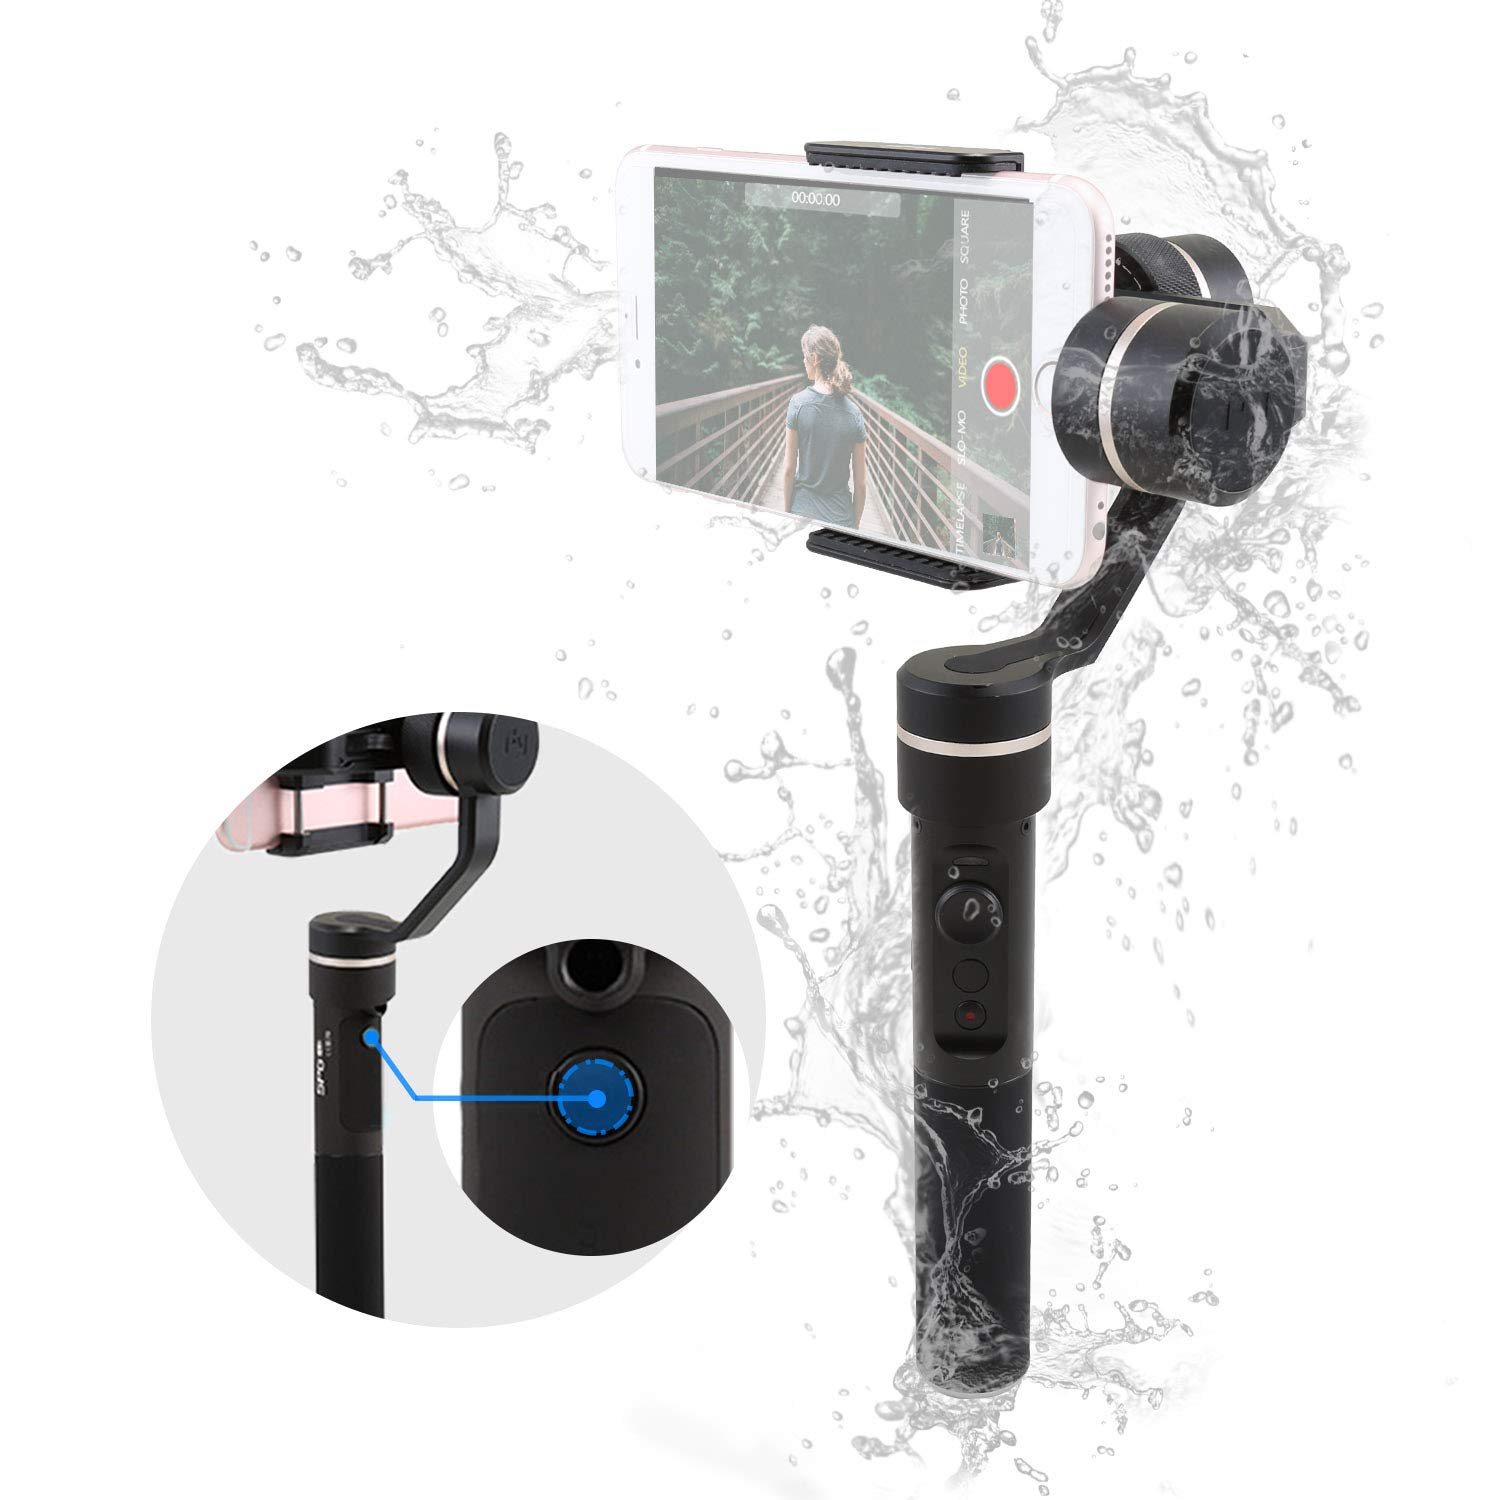  Guilin Feiyu Technology Incorporated Company FeiyuTech SPG 3-Axis Gimbal (Splash-Proof Version), with Smart Portrait Mode, Precisely Adaptable for iPhone, Samsung, HUIWEI Smart Phones GoPro HERO5 and...